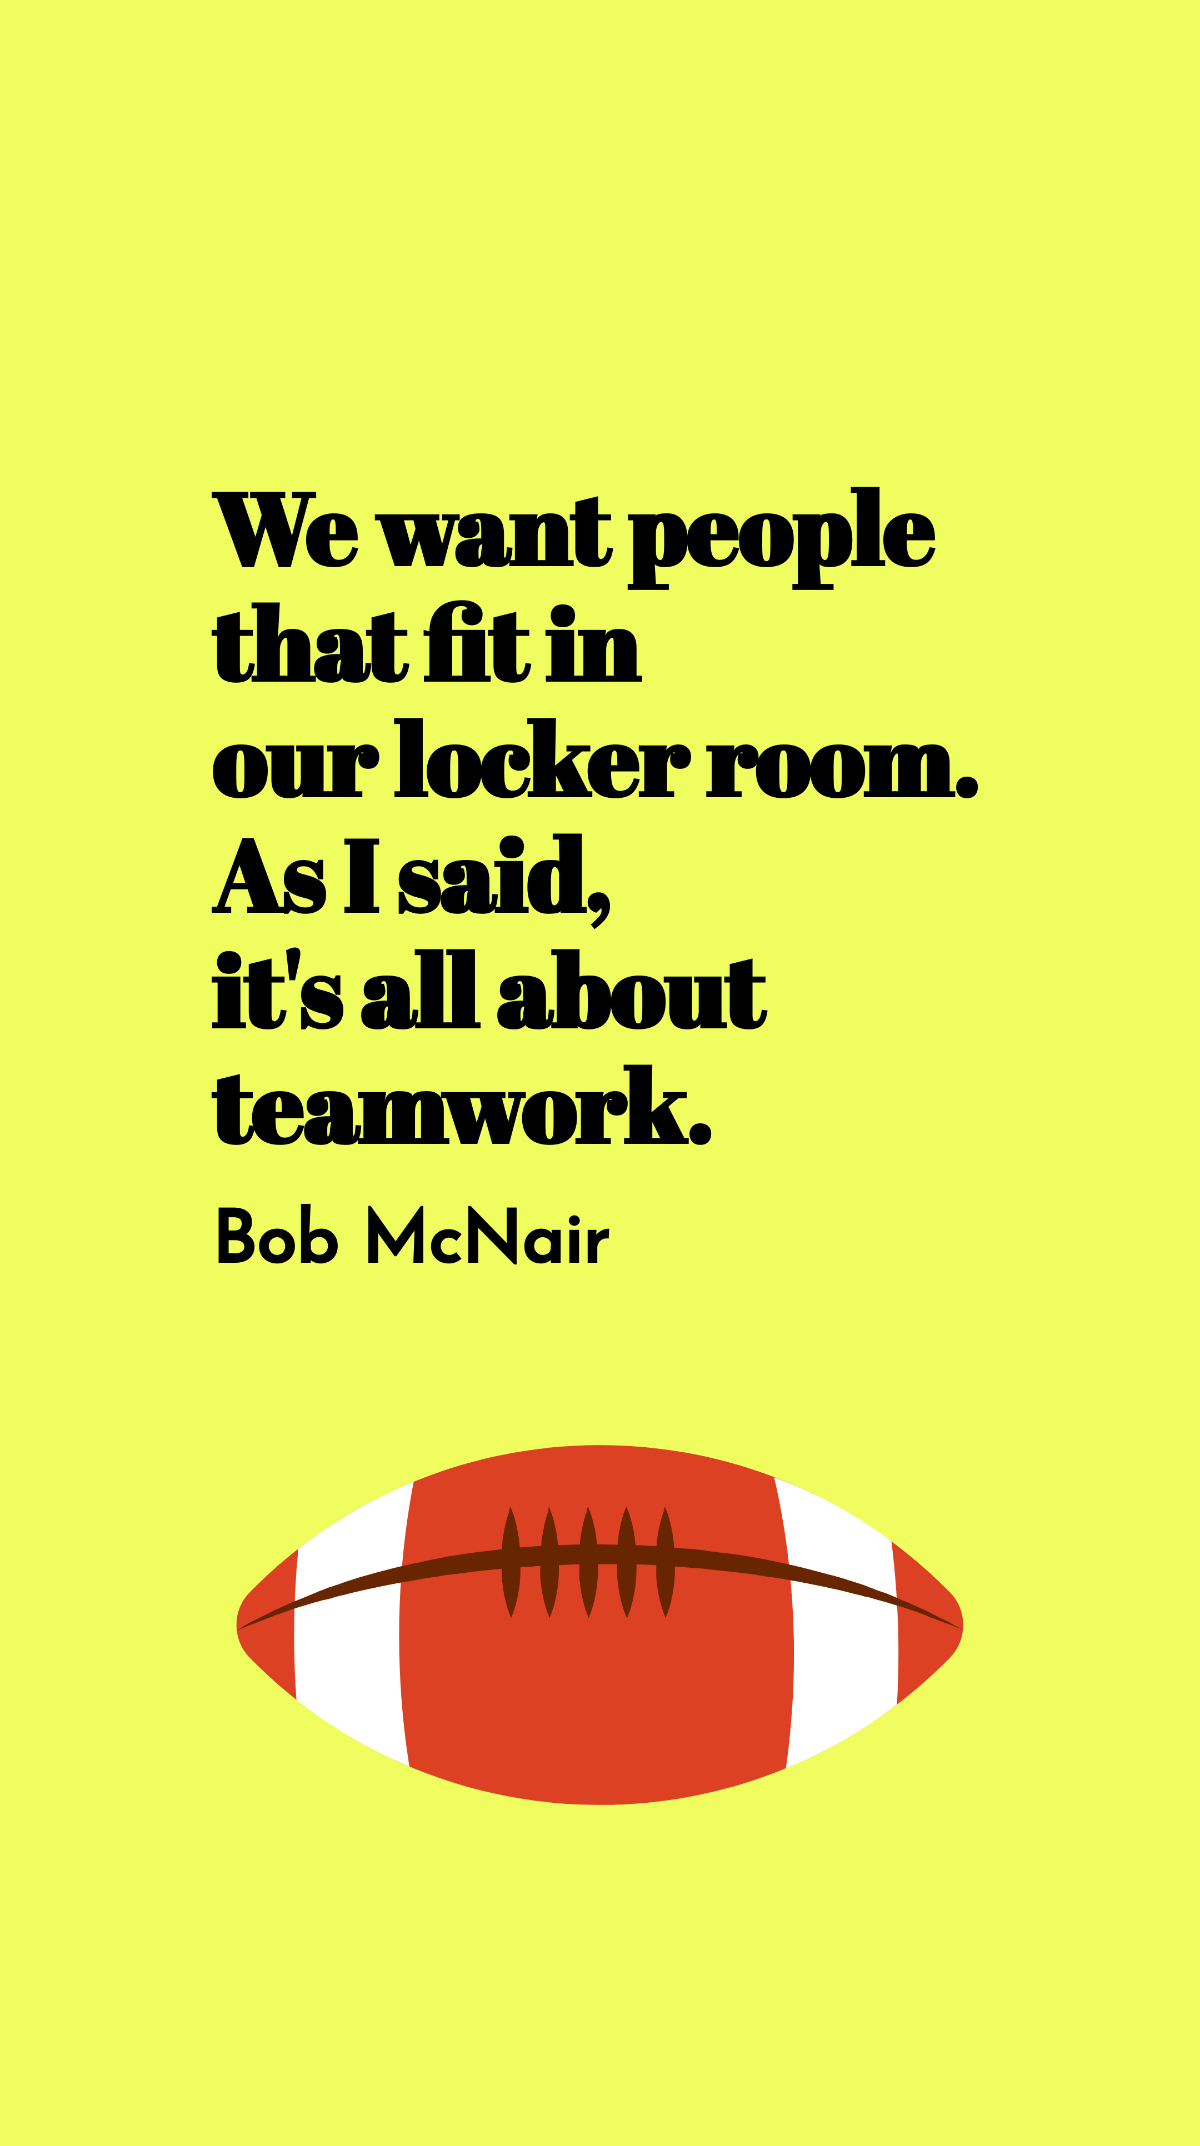 Bob McNair - We want people that fit in our locker room. As I said, it's all about teamwork. Template